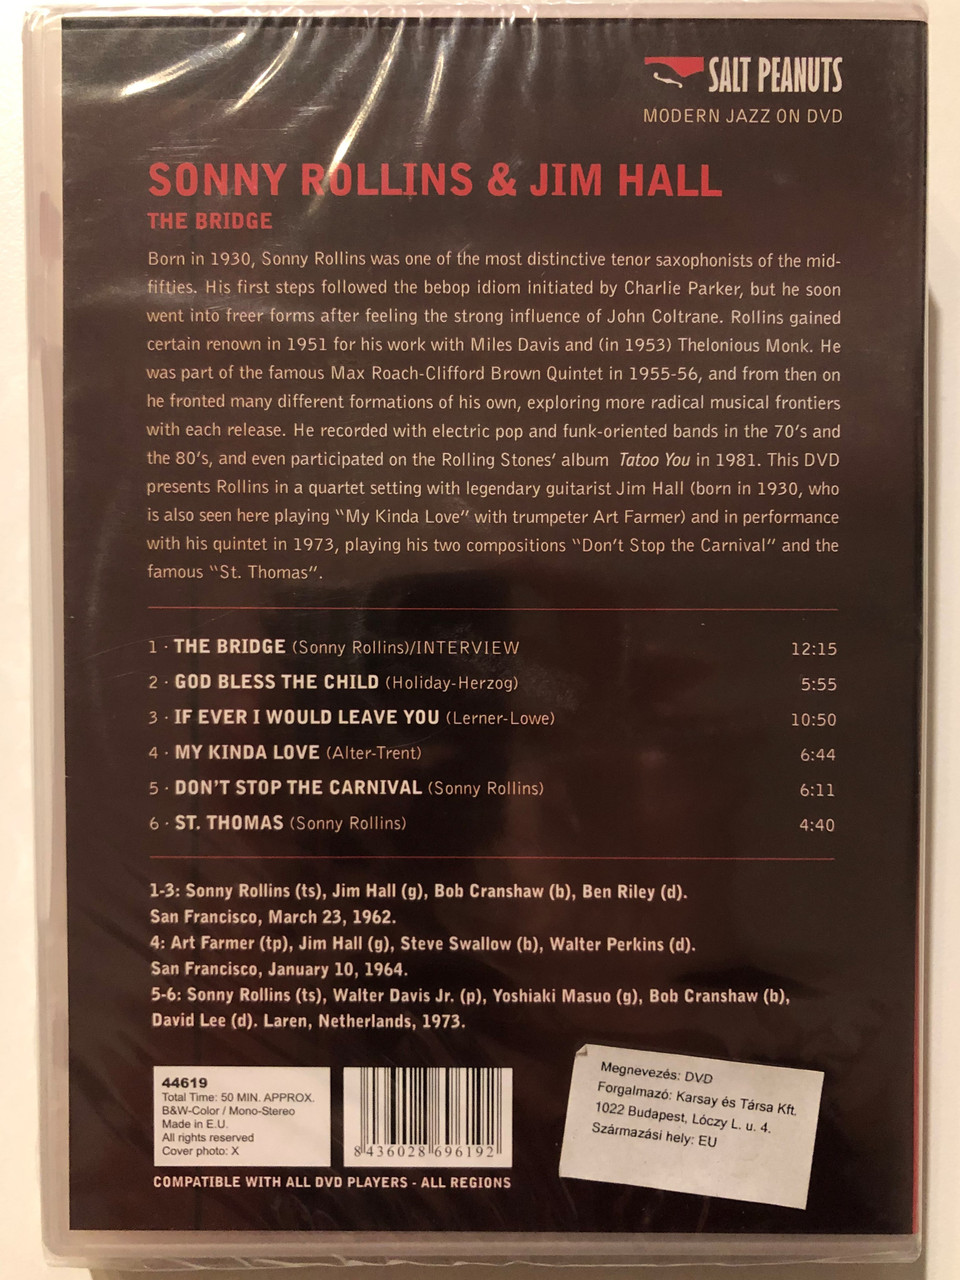 Sonny_Rollins_and_Jim_Hall_The_Bridge_Rare_live_footage_of_Sonny_Rollins_and_Jim_Hall_MODERN_JAZZ_ON_DVD_Jim_Hall_with_Art_Farmer_in_San_Francisco_1964_Rollins_in_the_Nether_3__50107.1692099942.1280.1280.JPG (960×1280)